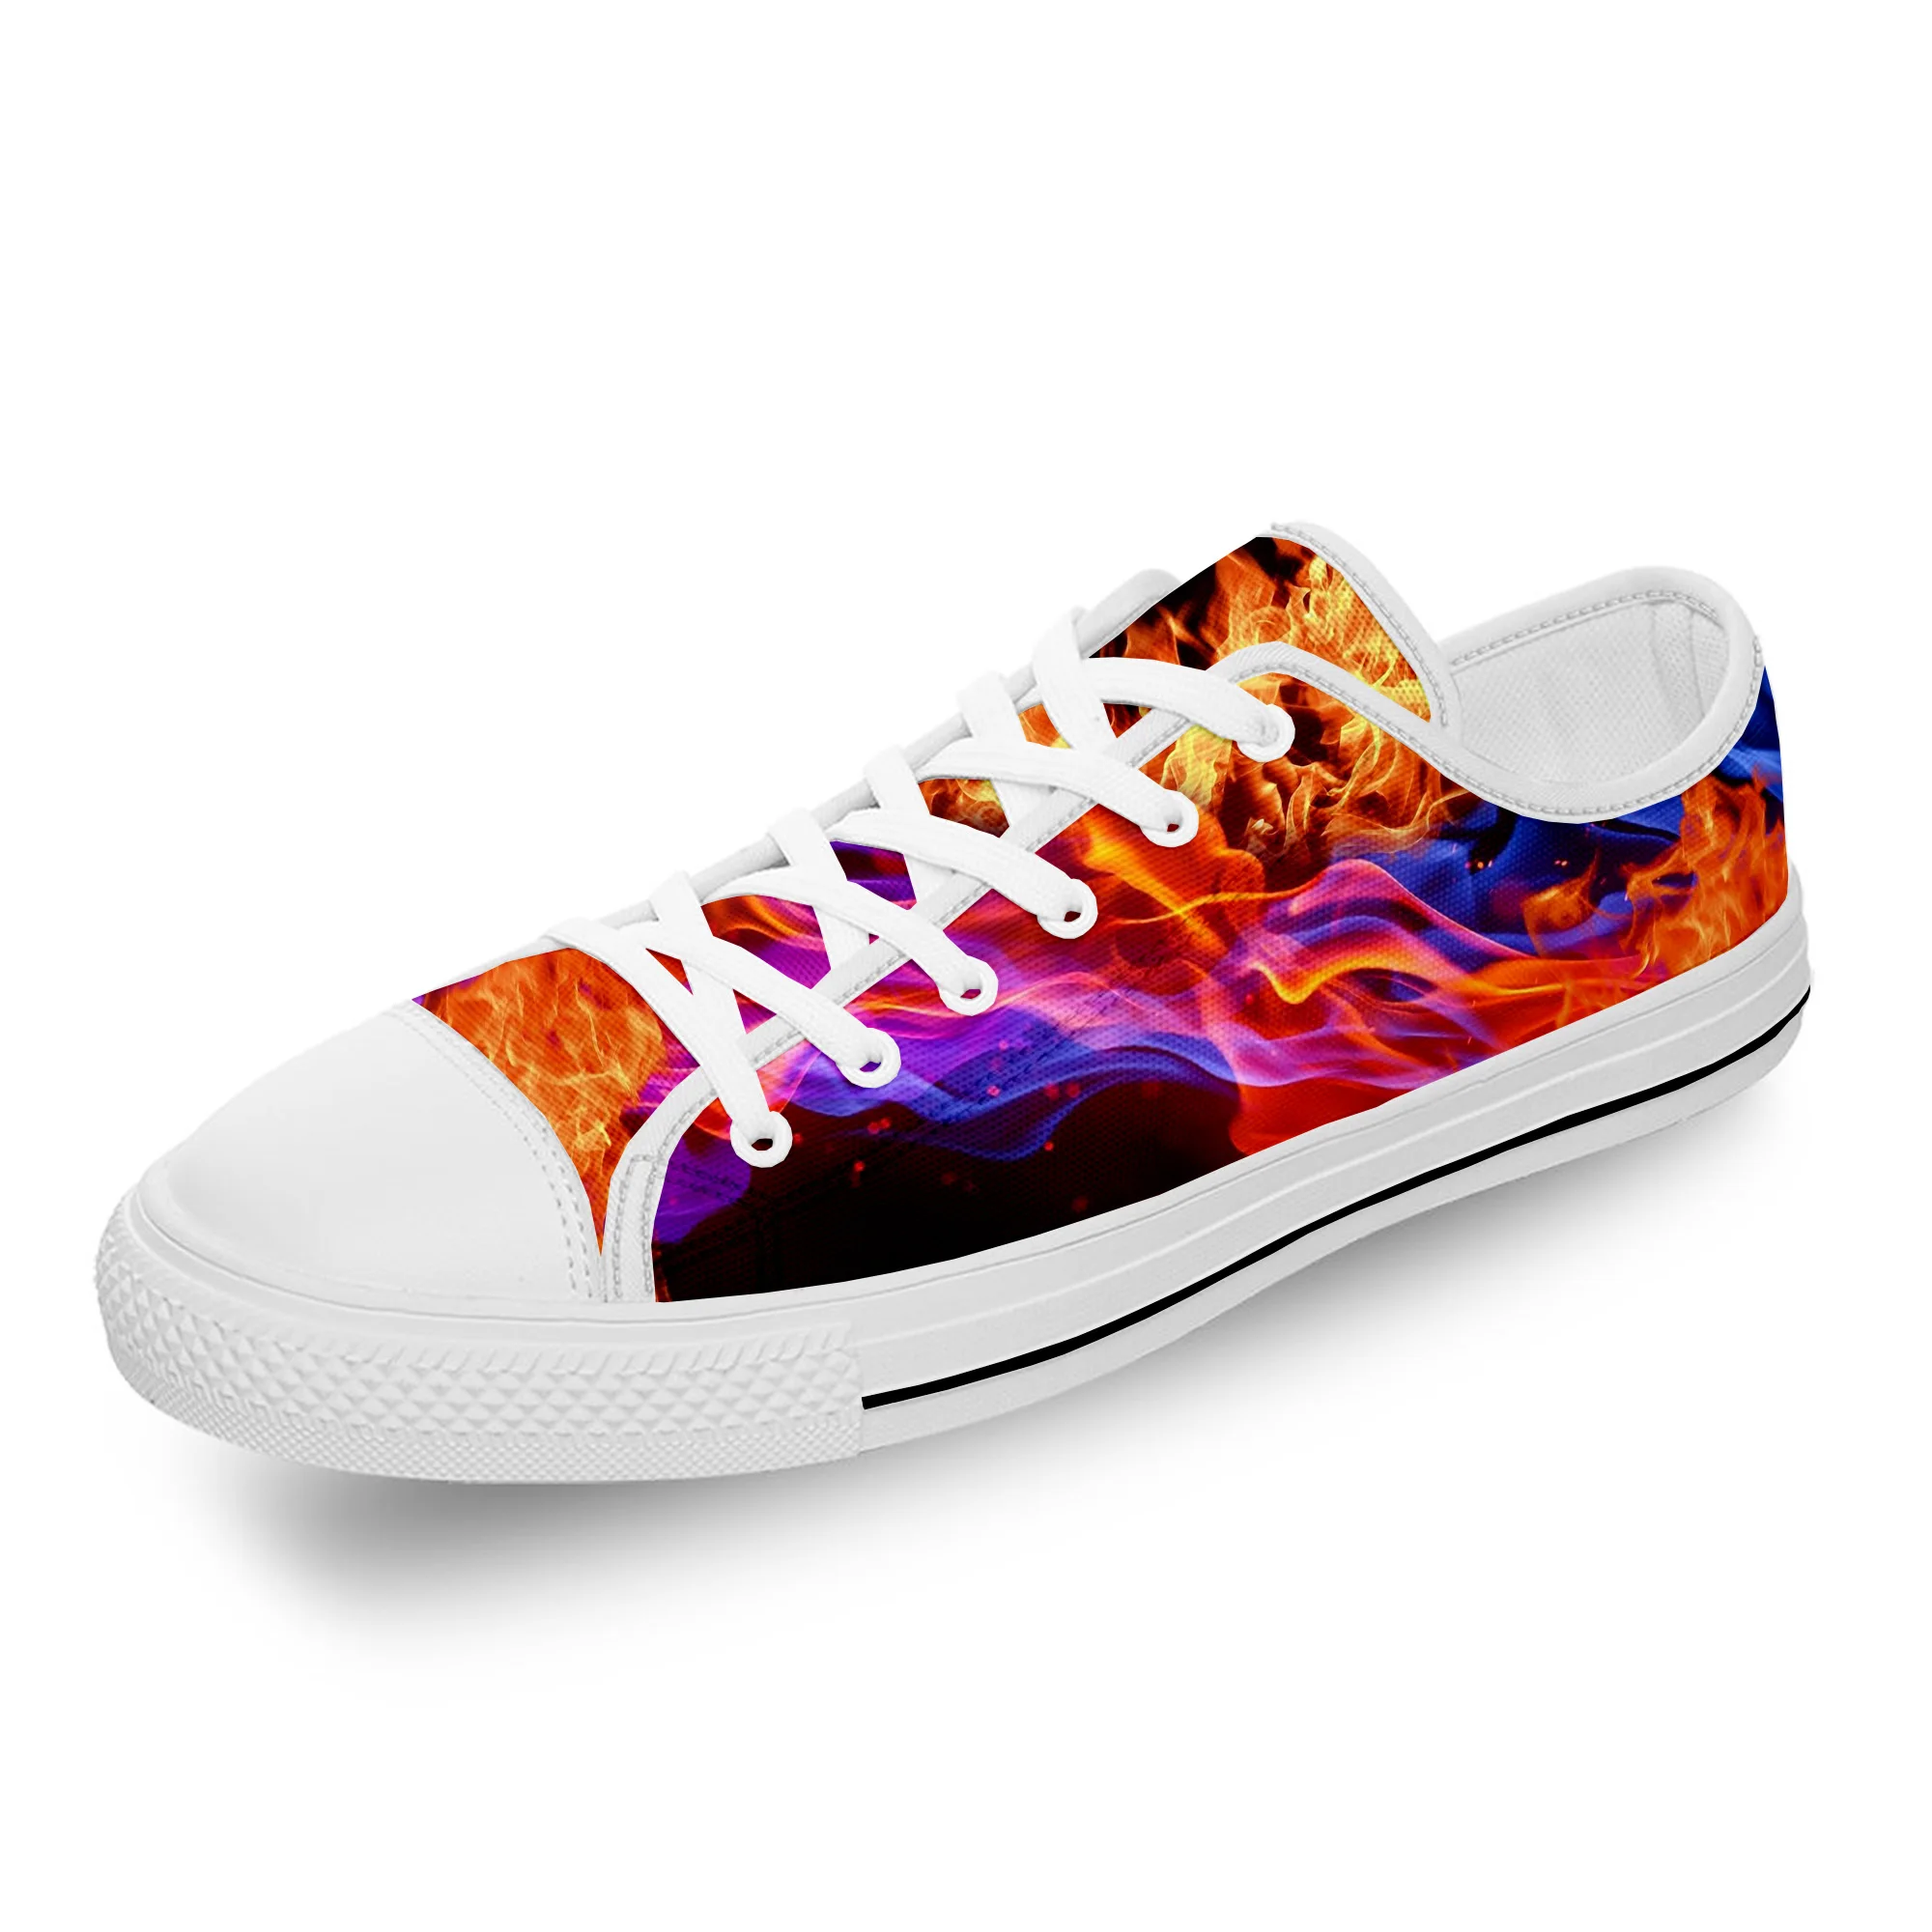 Anime Cartoon Flaming Flame Fire White Cloth Fashion 3D Print Low Top Canvas Shoes Men Women Lightweight Breathable Sneakers thundercats anime cartoon fashion personality cool sport running shoes lightweight breathable 3d print men women mesh sneakers